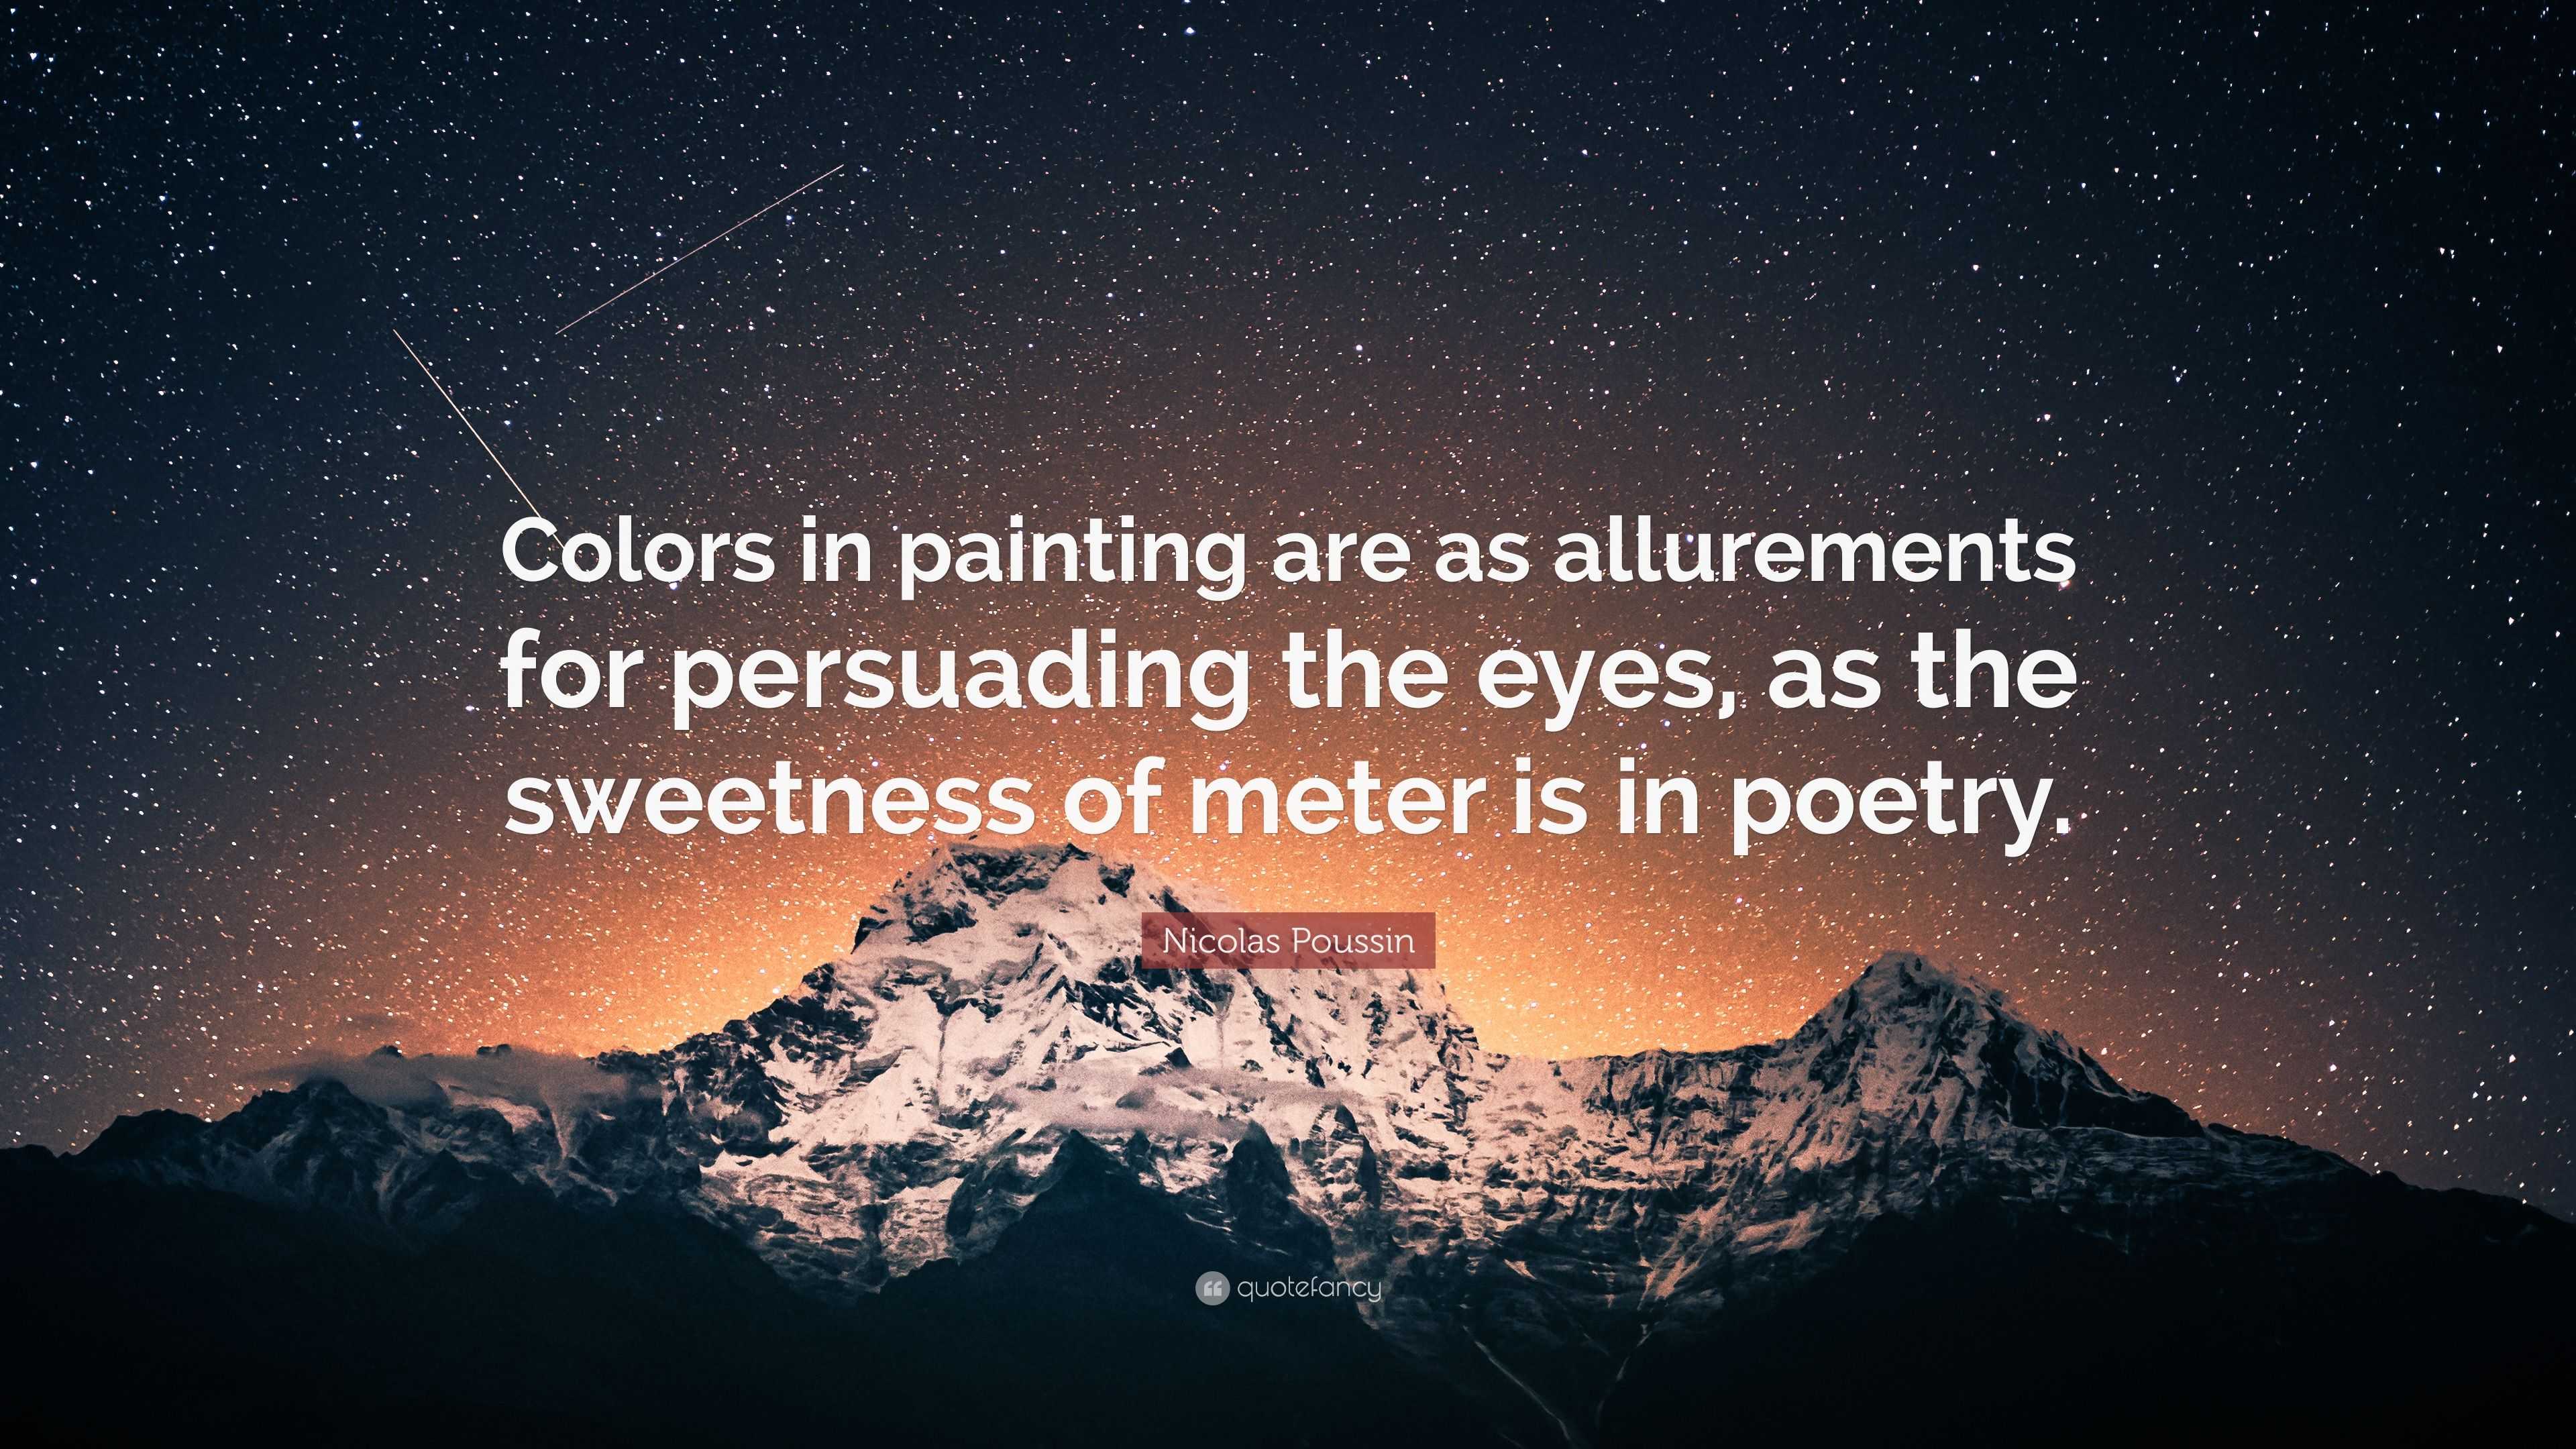 Nicolas Poussin Quote: “Colors in painting are as allurements for ...